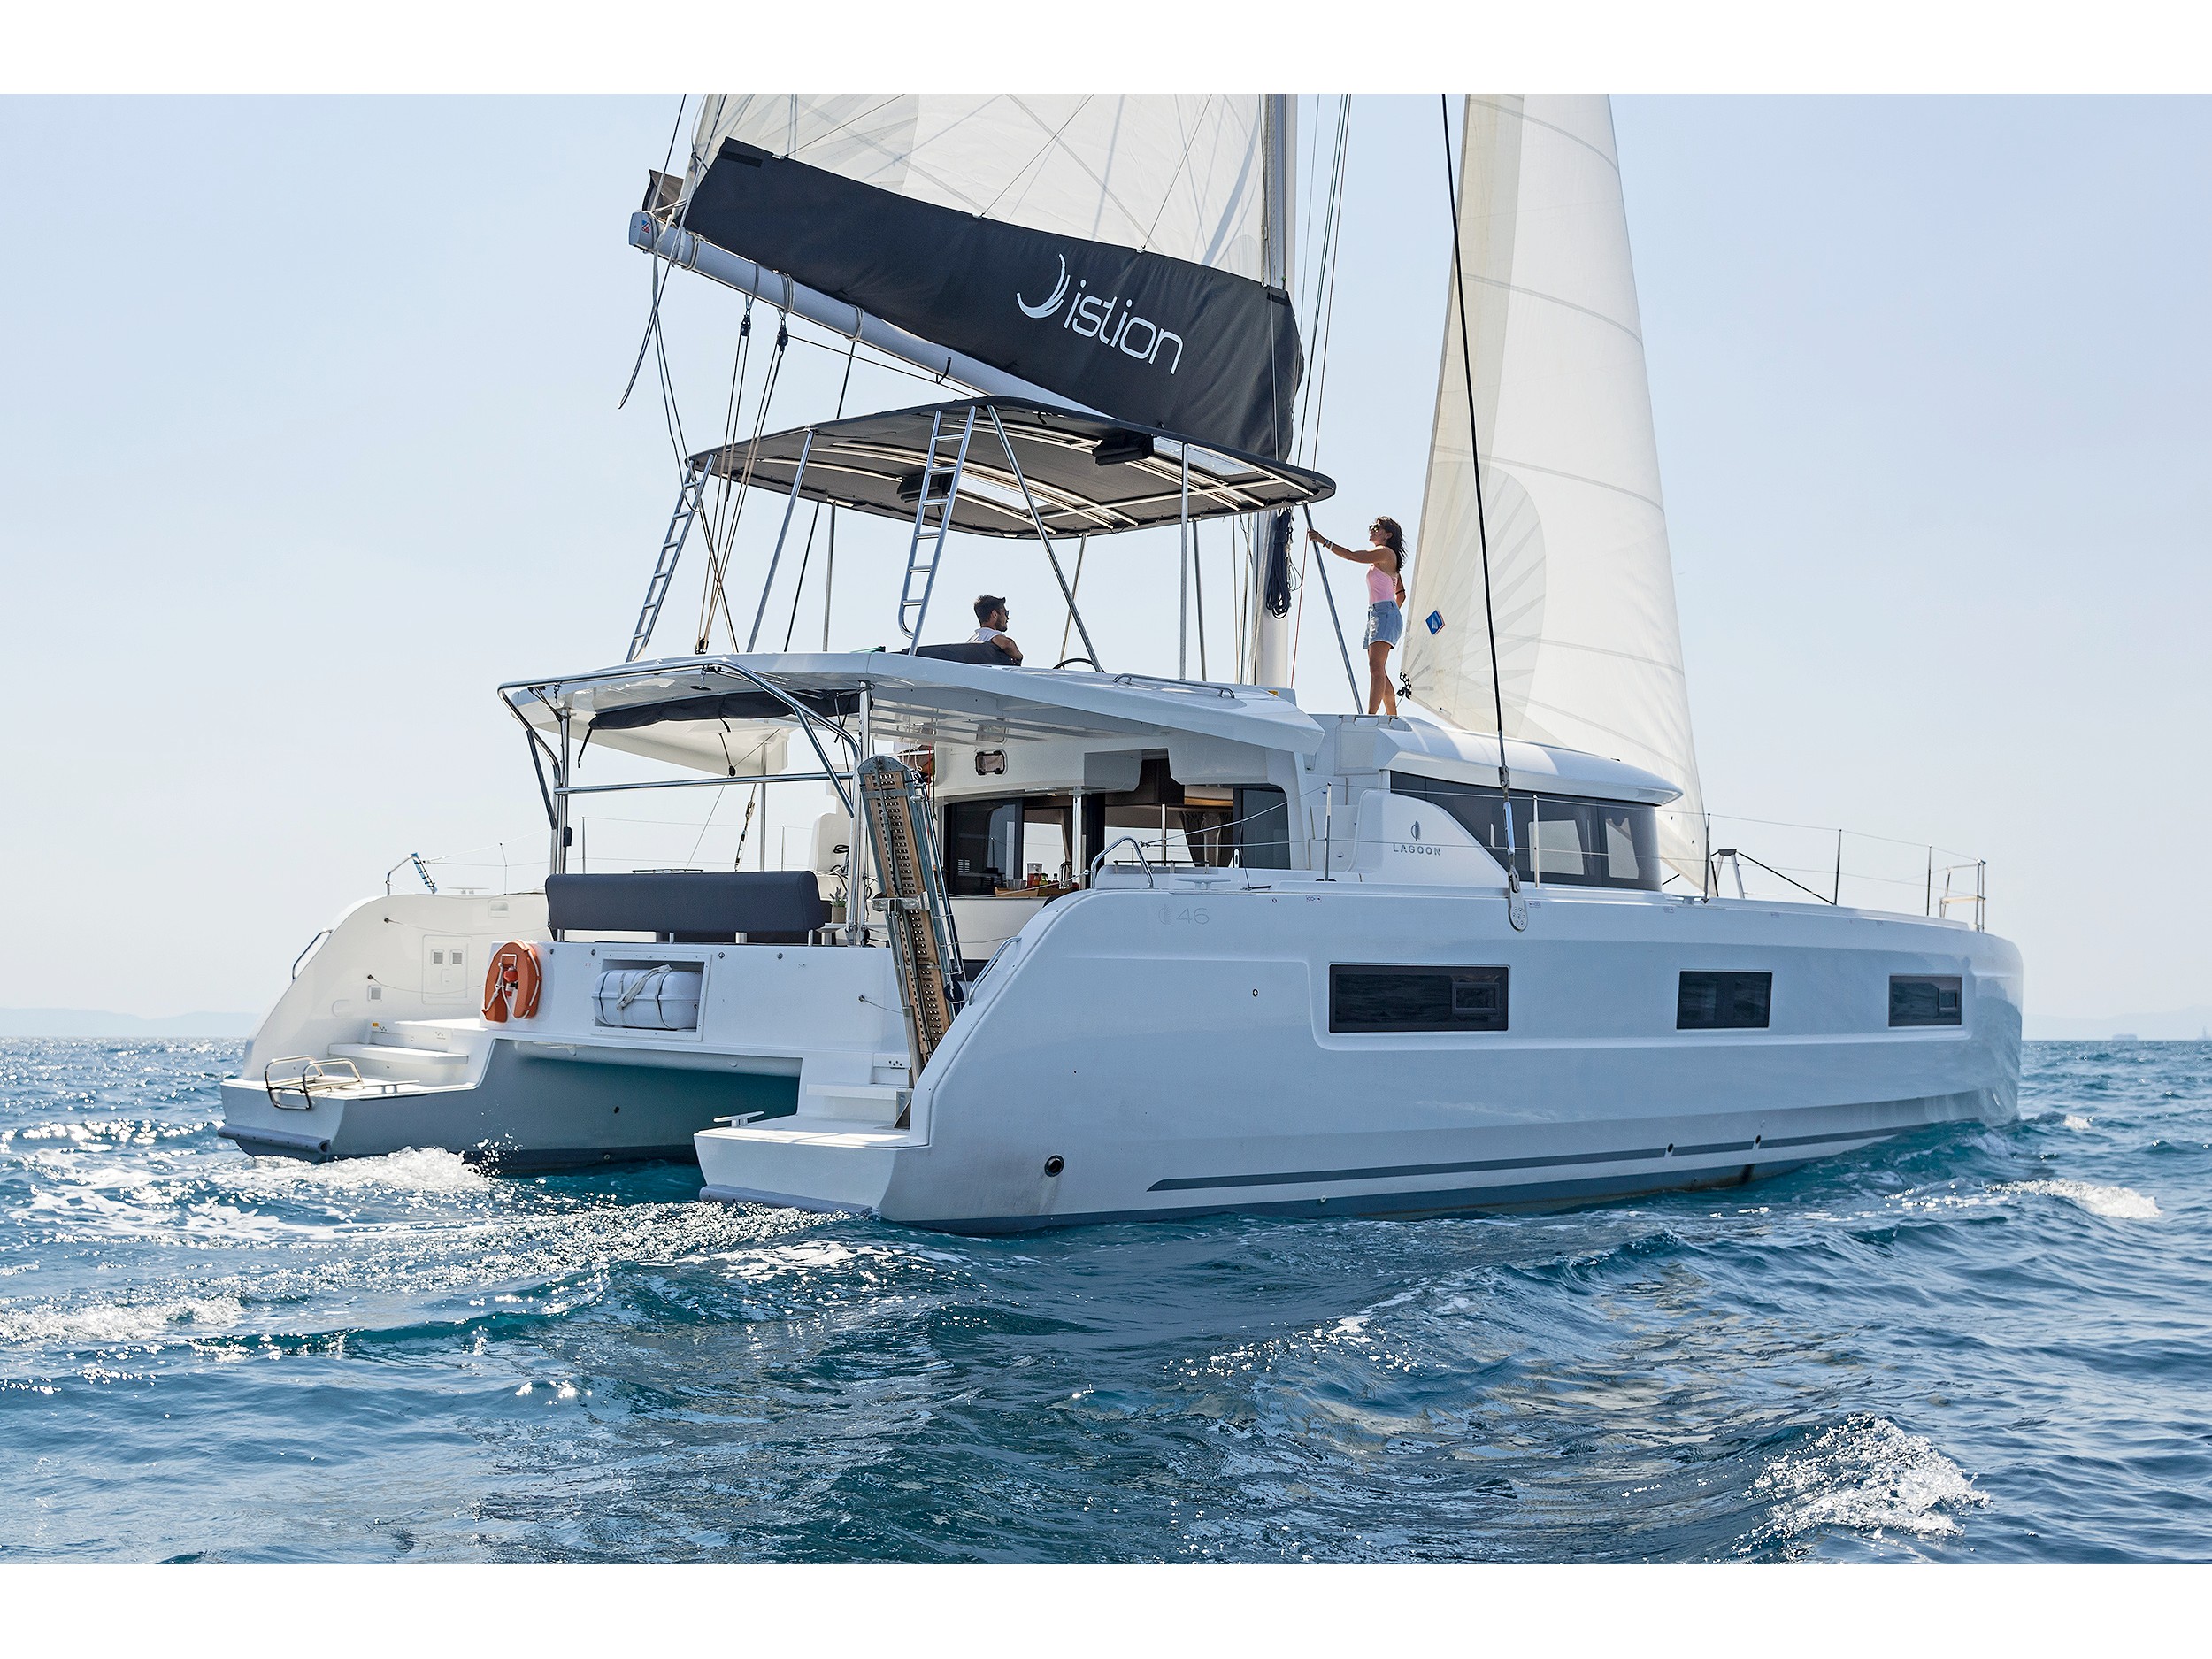 Lagoon 46  - Alimos Yacht Charter & Boat hire in Greece Athens and Saronic Gulf Athens Alimos Alimos Marina 2